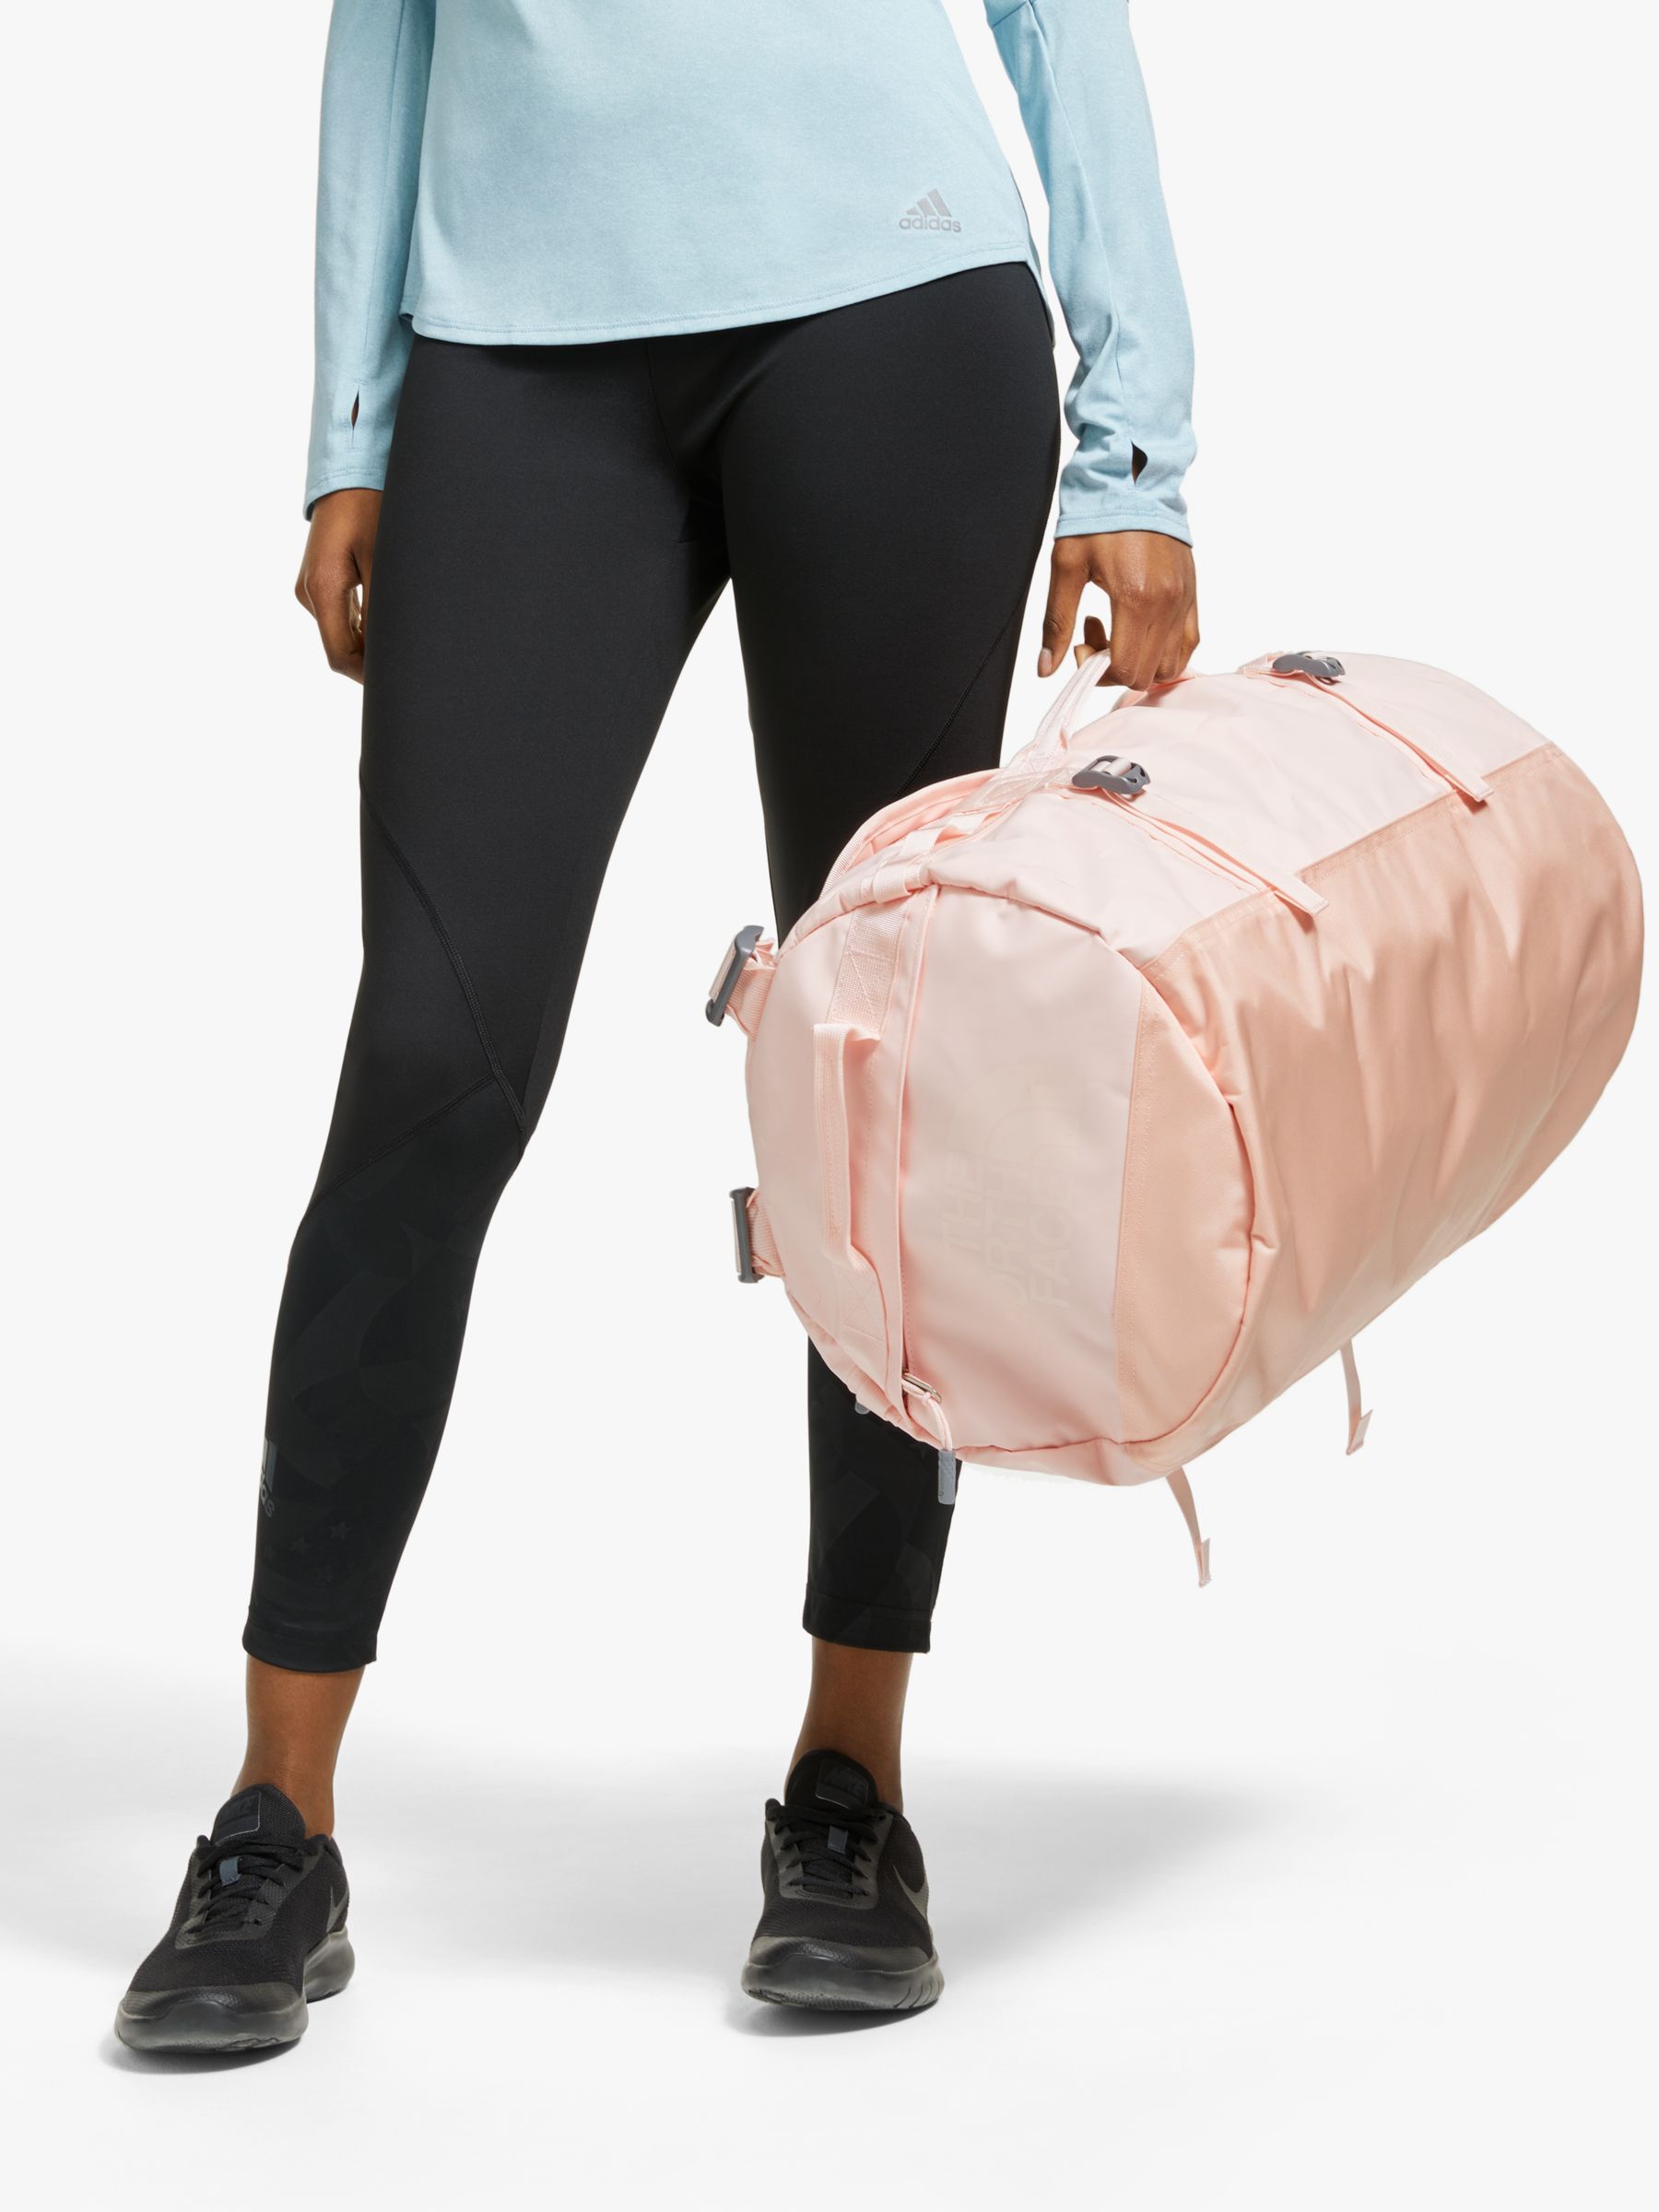 north face pink duffel